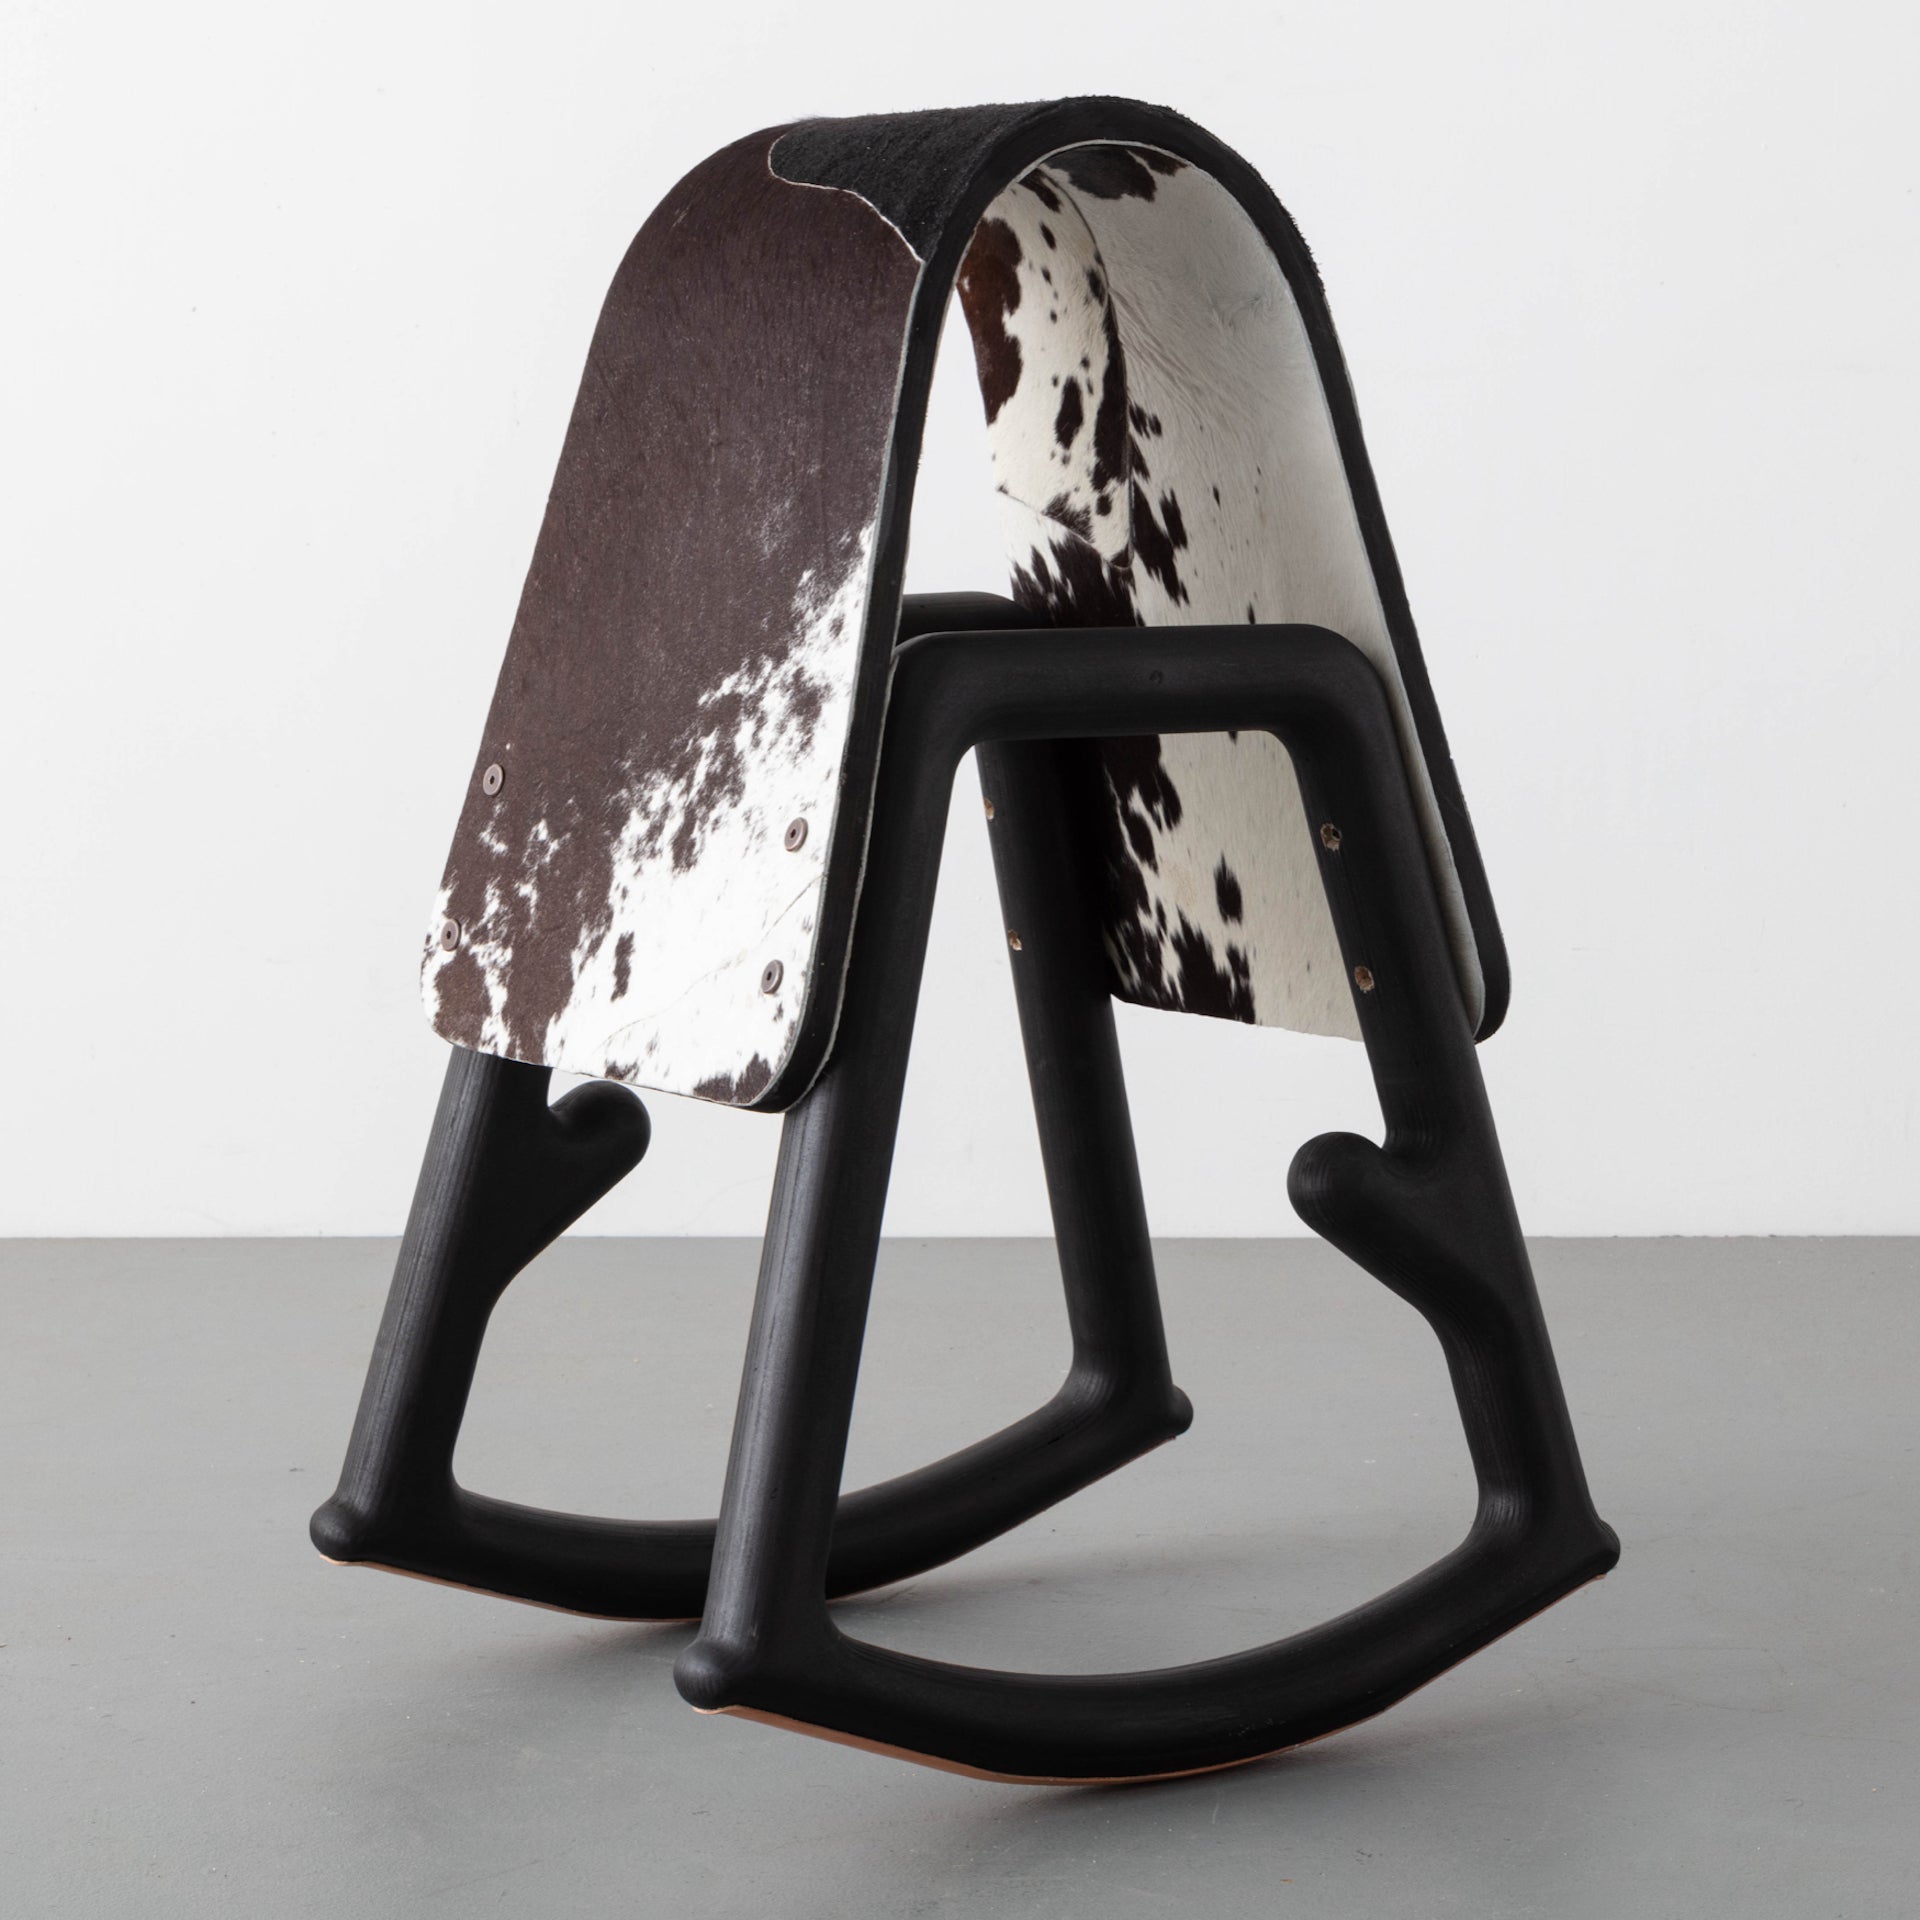 Represented by R & Company: Sinmi Stool by Norman Teague, 2020, made of ebonized birch and birch plywood with leather saddle by Yohance Lacour. Acquired by the Smithsonian National Museum of African American History and Culture. Photo © Joe Kramm; courtesy of R & Company and the artist